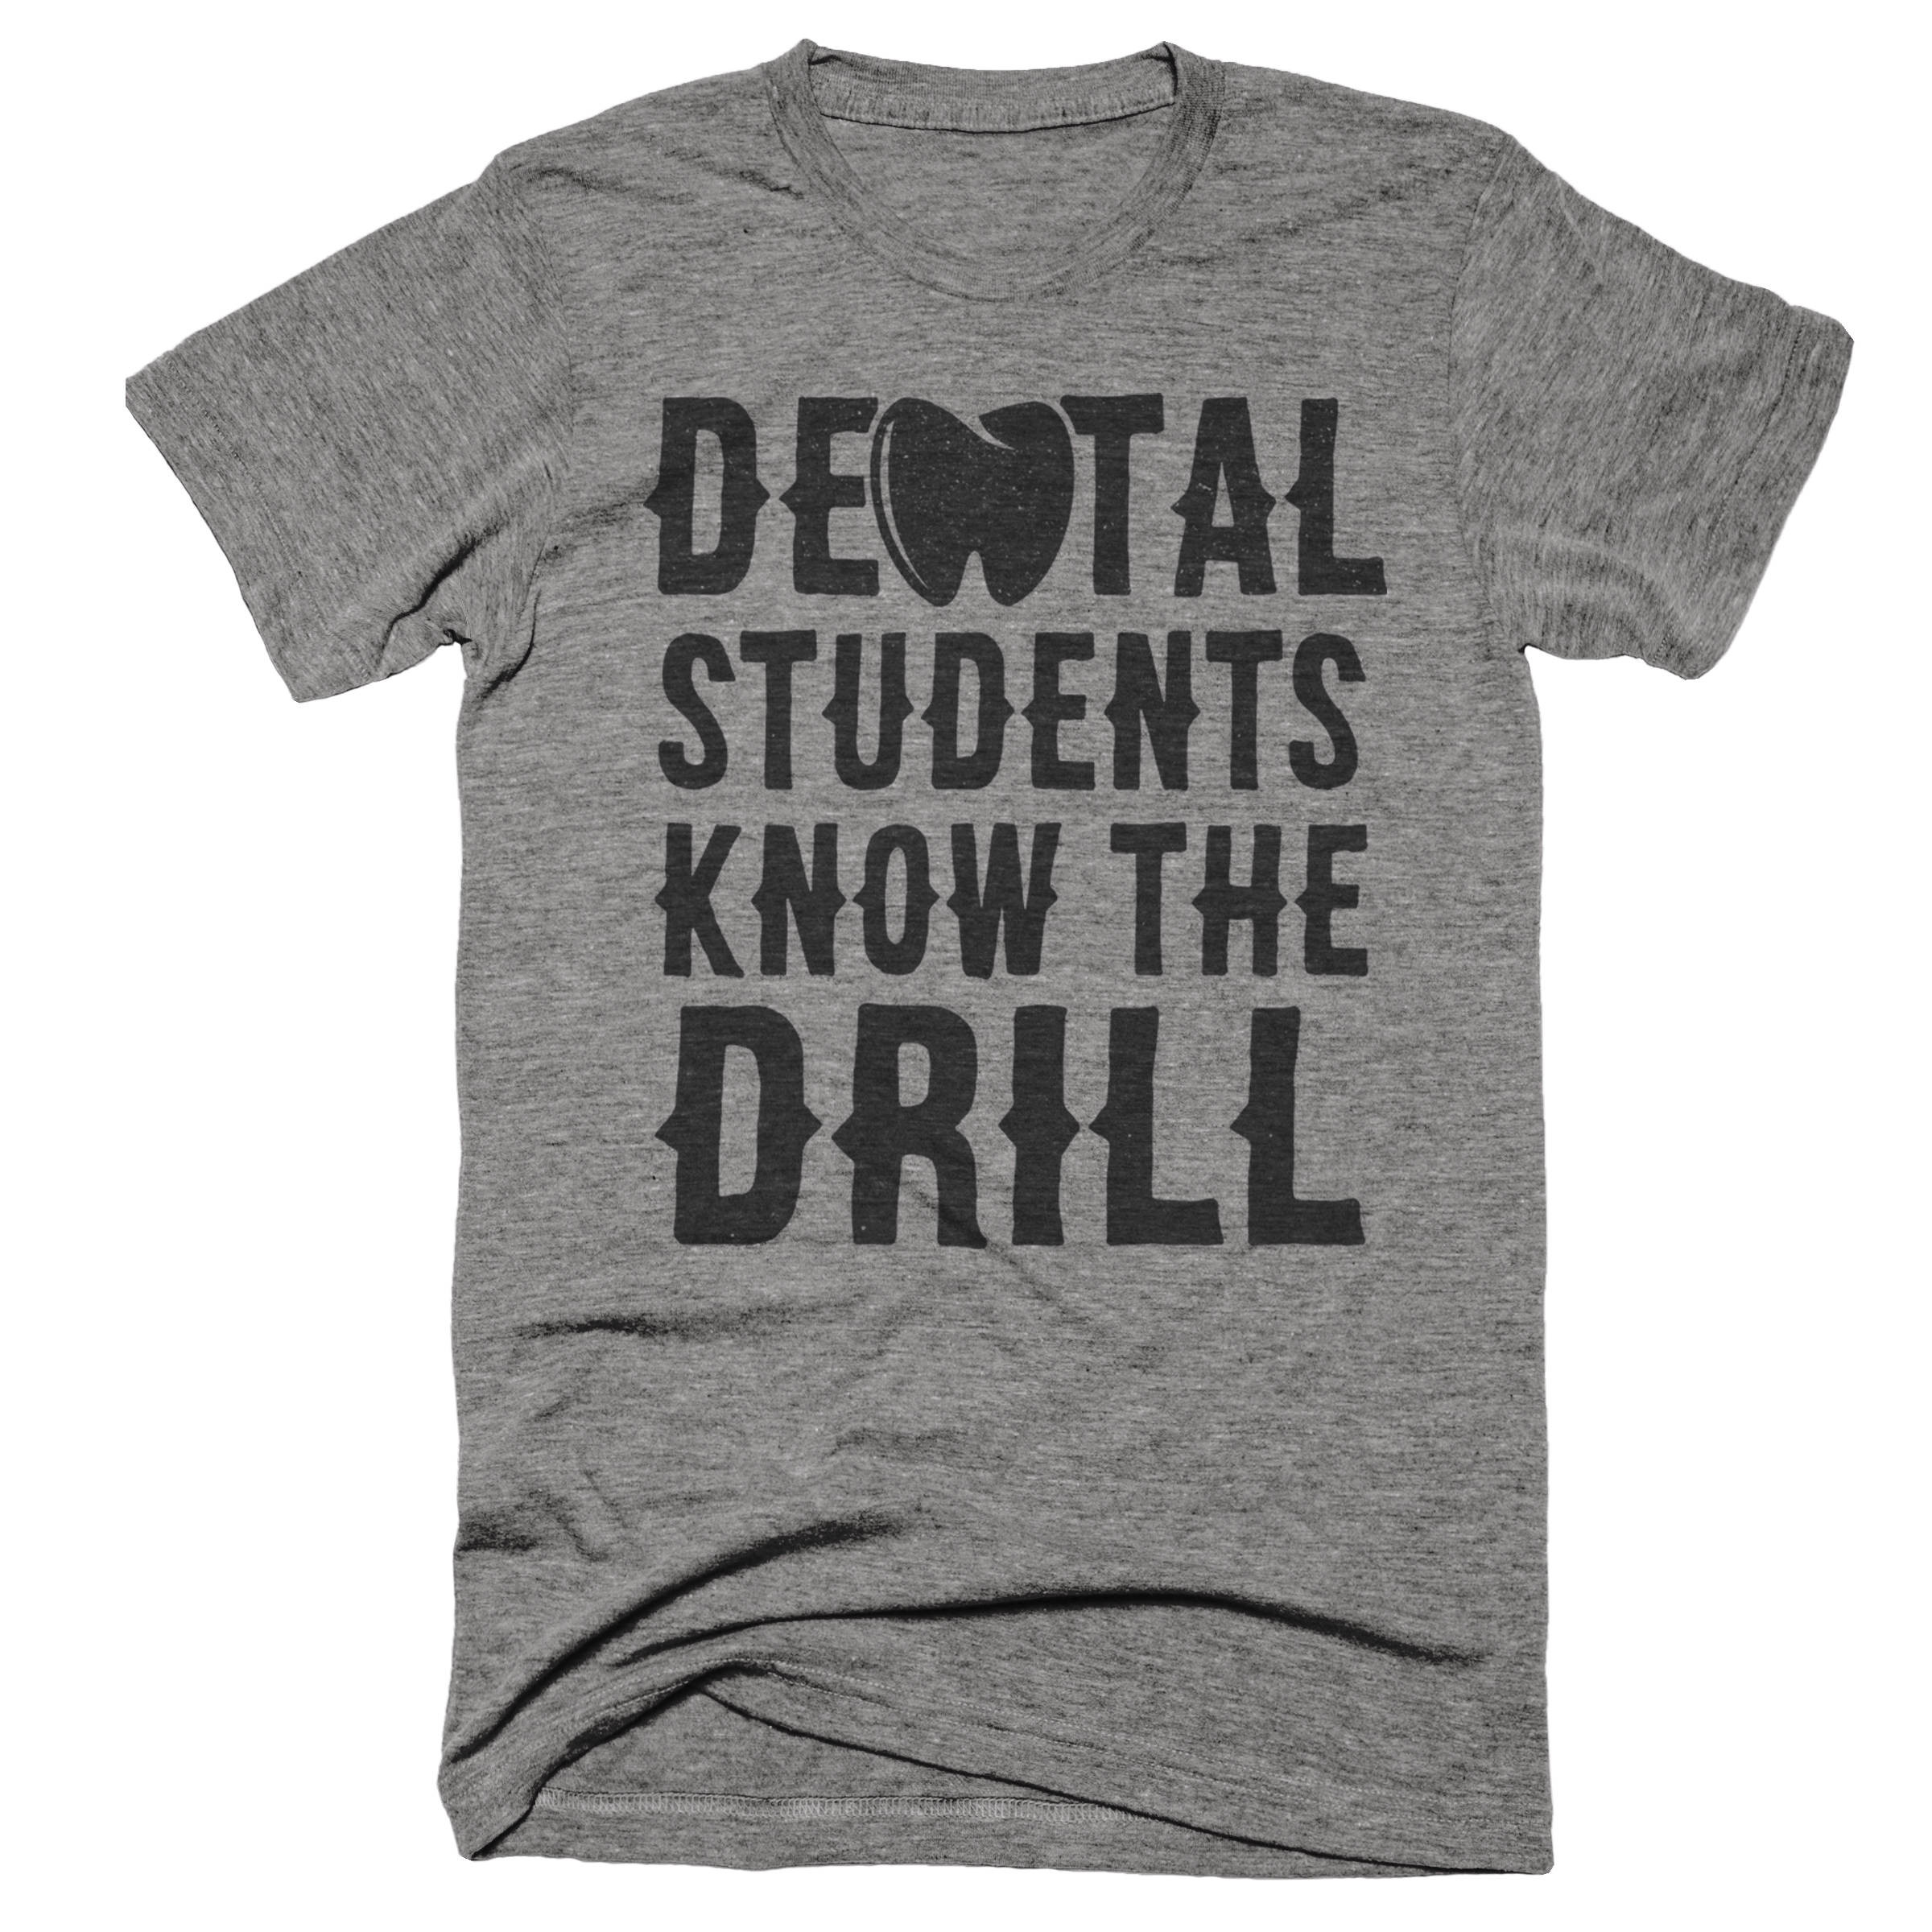 Dental Hygienist Graduation Gift Ideas
 Dental Students Know The Drill Dentist Gift Funny